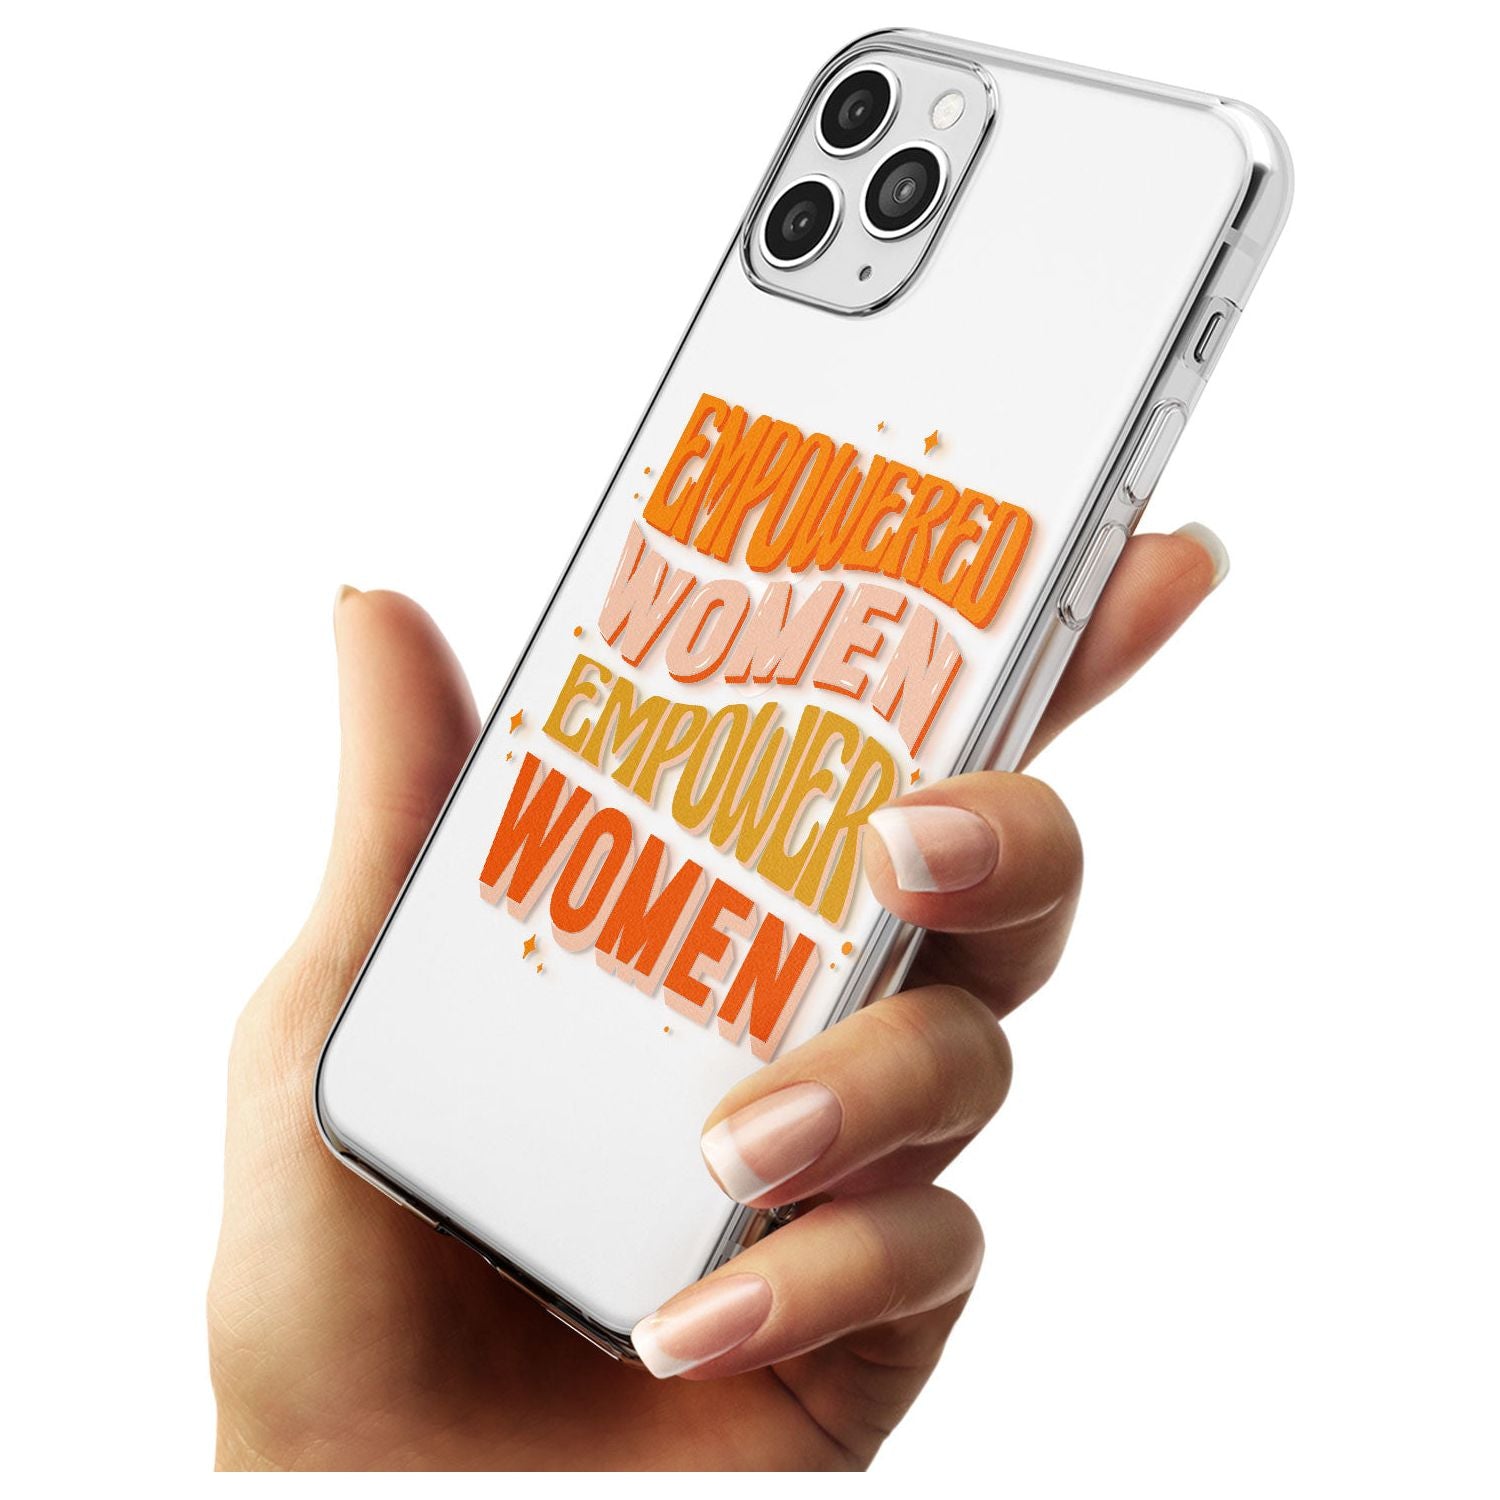 Empowered Women Slim TPU Phone Case for iPhone 11 Pro Max